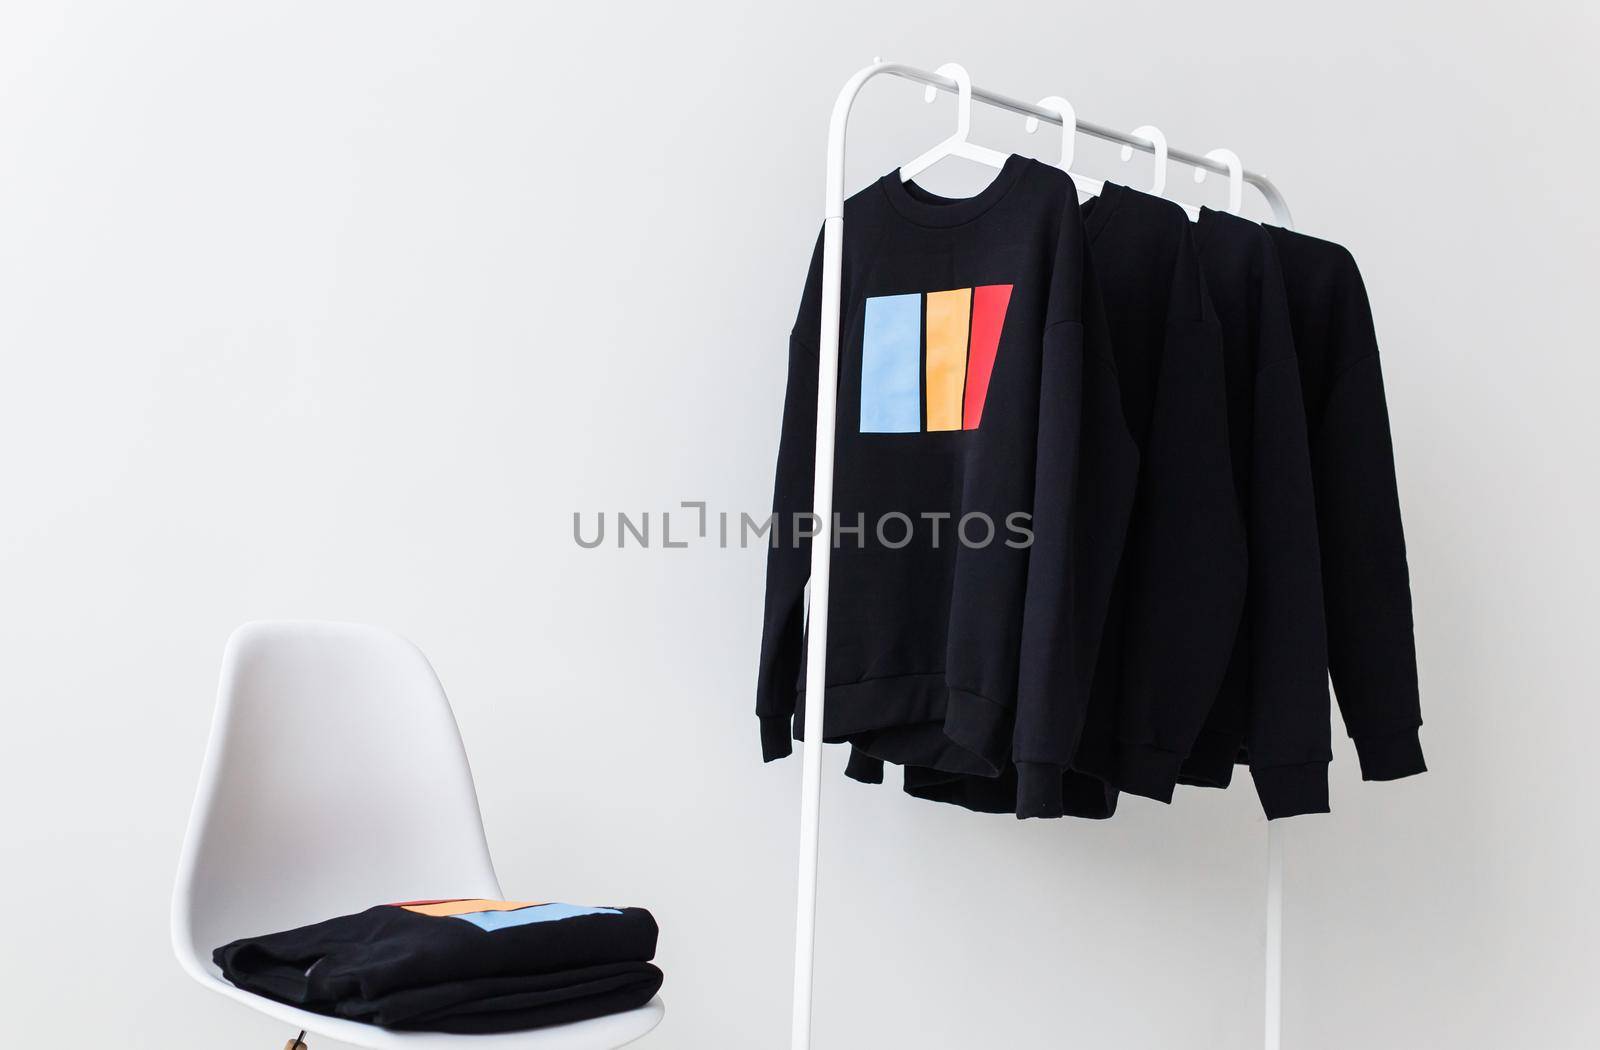 Sweatshirts and hoodies hanging on hangers in the store. Street fashion, unisex and youth wears